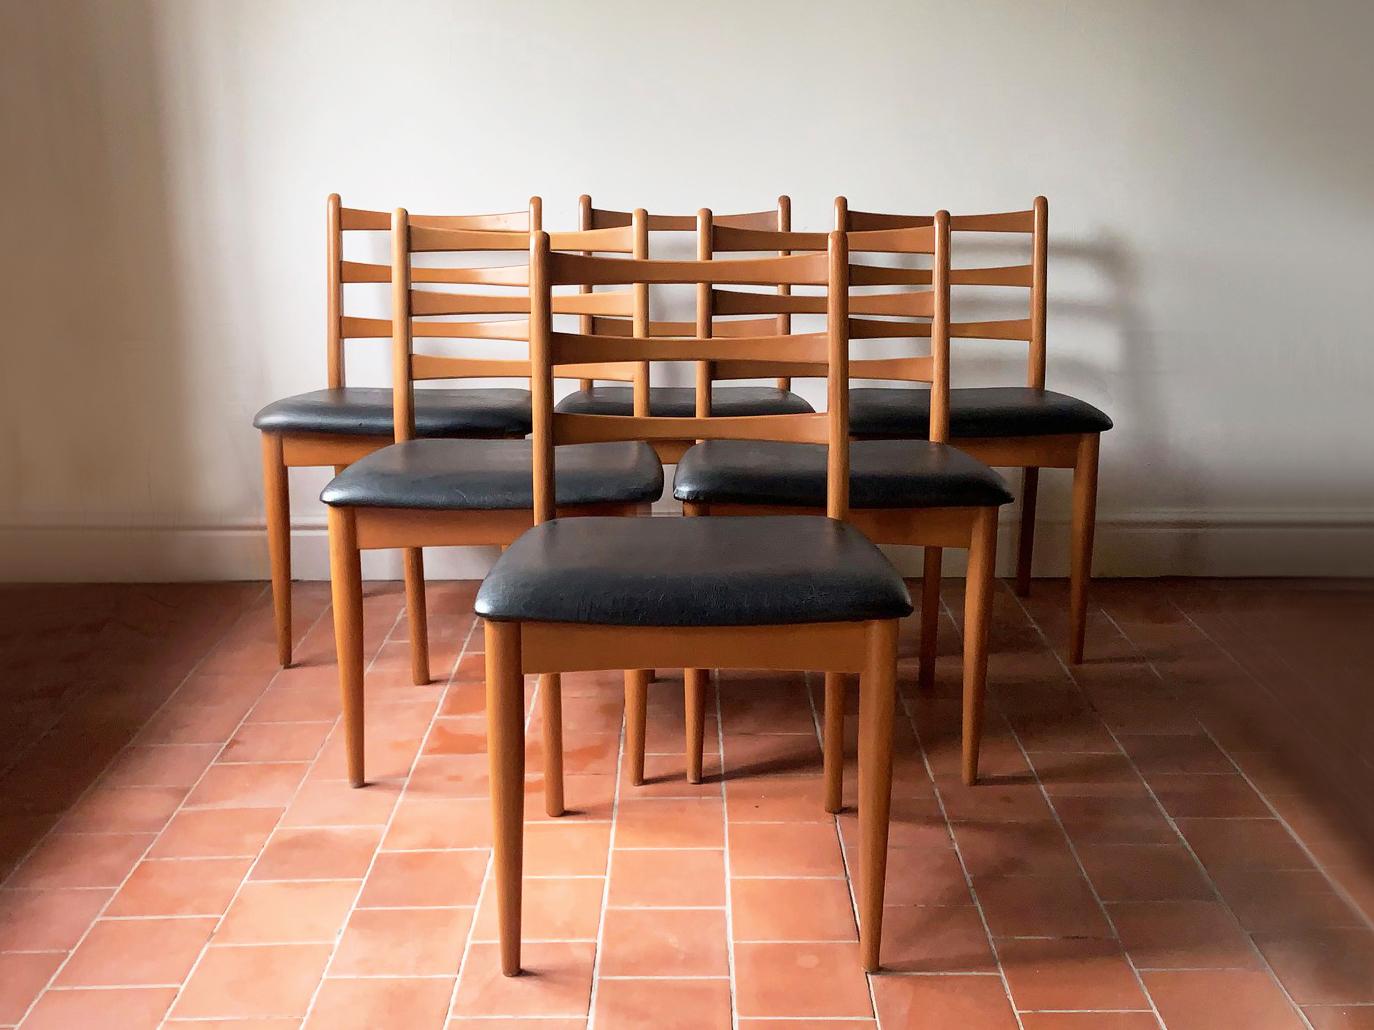 The price listed is for the SIX chairs
(Will consider selling 4 chairs, price on request)

Founded in 1957 by Chaim Schreiber, Schreiber furniture is an interesting British success story.  The Company was one of the biggest names in furniture in the